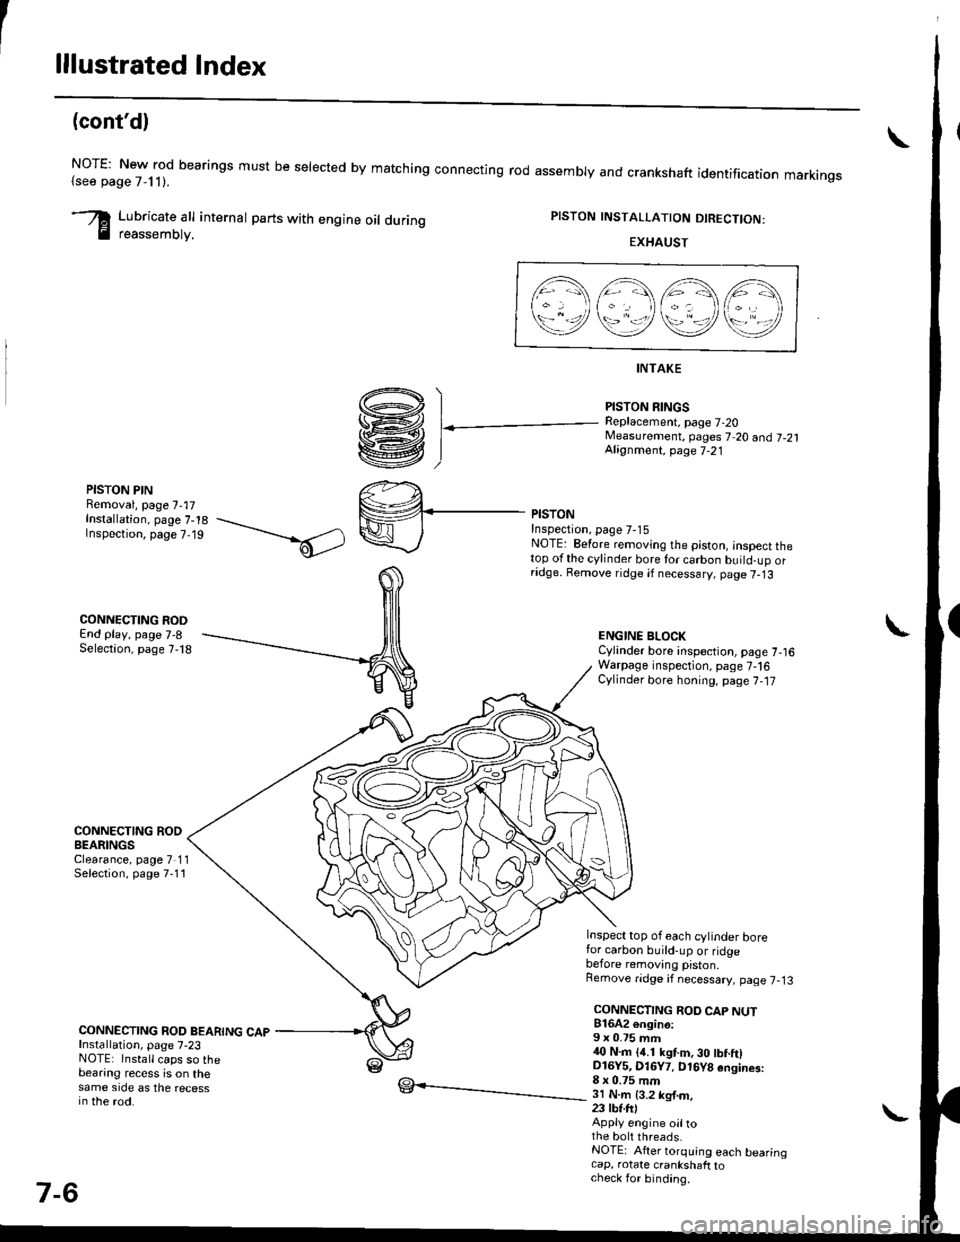 HONDA CIVIC 2000 6.G Owners Guide lllustrated Index
(contd)
NOTE: New rod bearings must be selected by matching connecting rod assembly and crankshaft(see page 7,11).identification markings
Lubricate all internal parts with engine oi